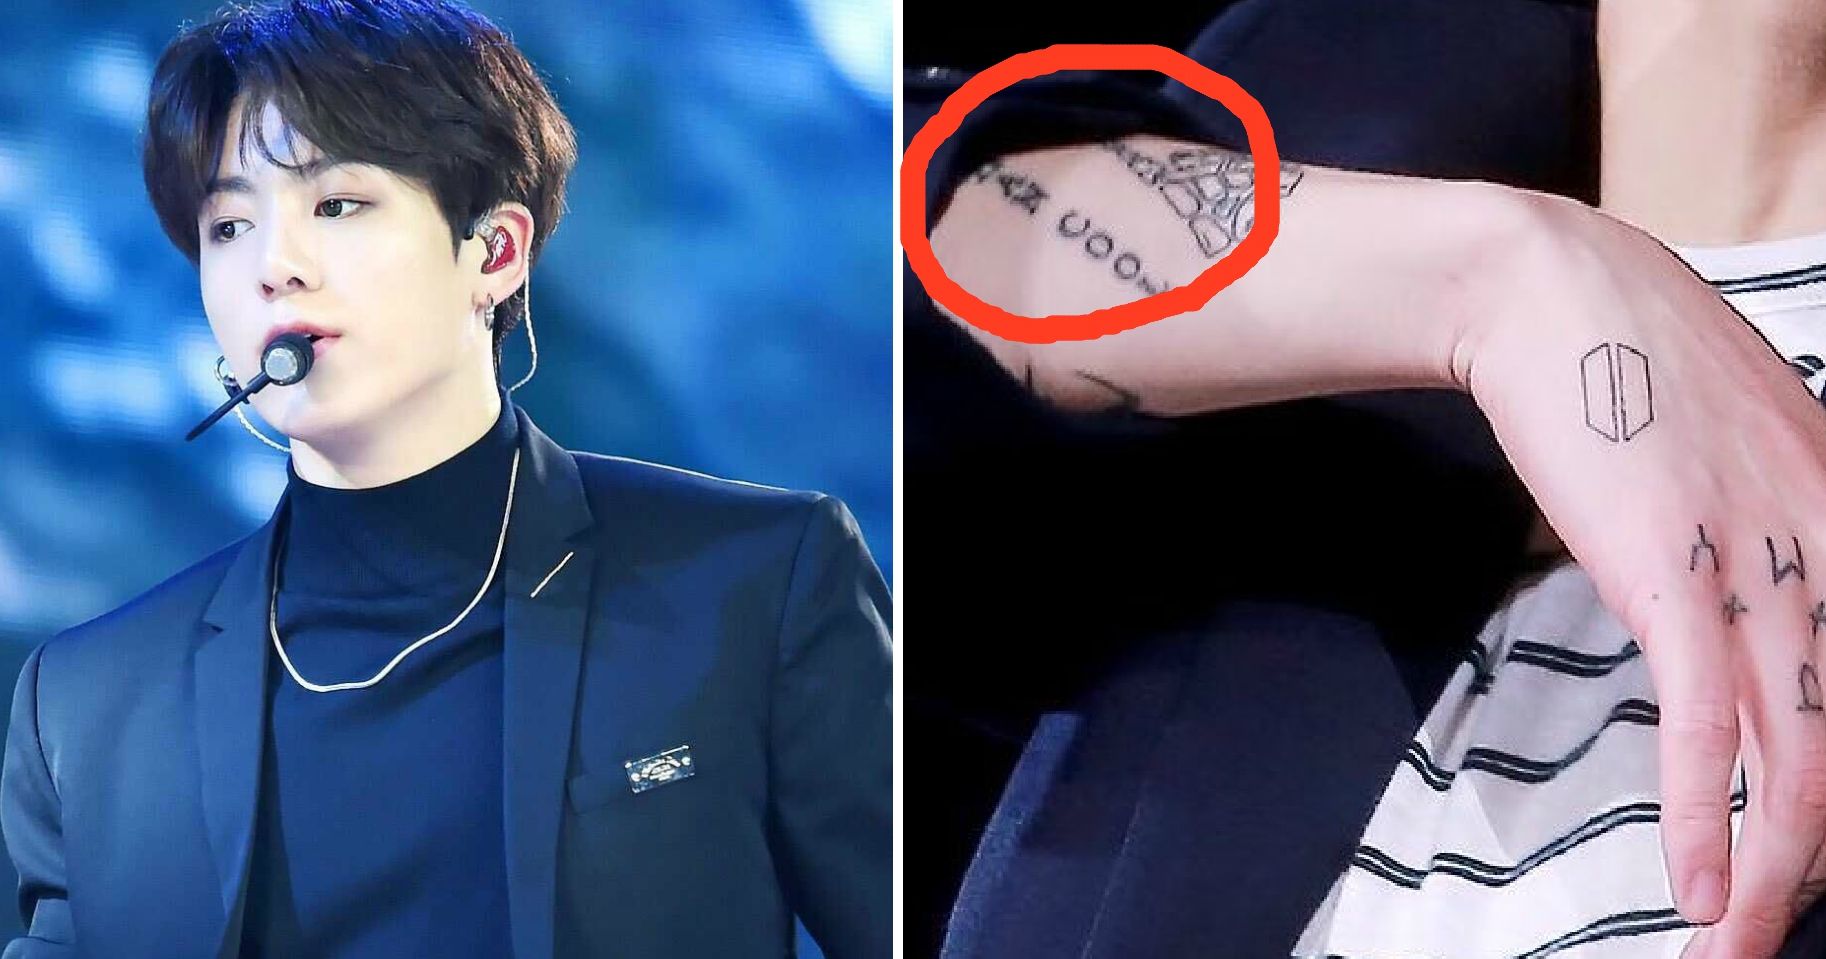 GUYSSD!!! jungkook has nirvana lyrics tattooed on his arm it's his favorite  quote! and d-7 is nirvana song!! JJK1 - iFunny